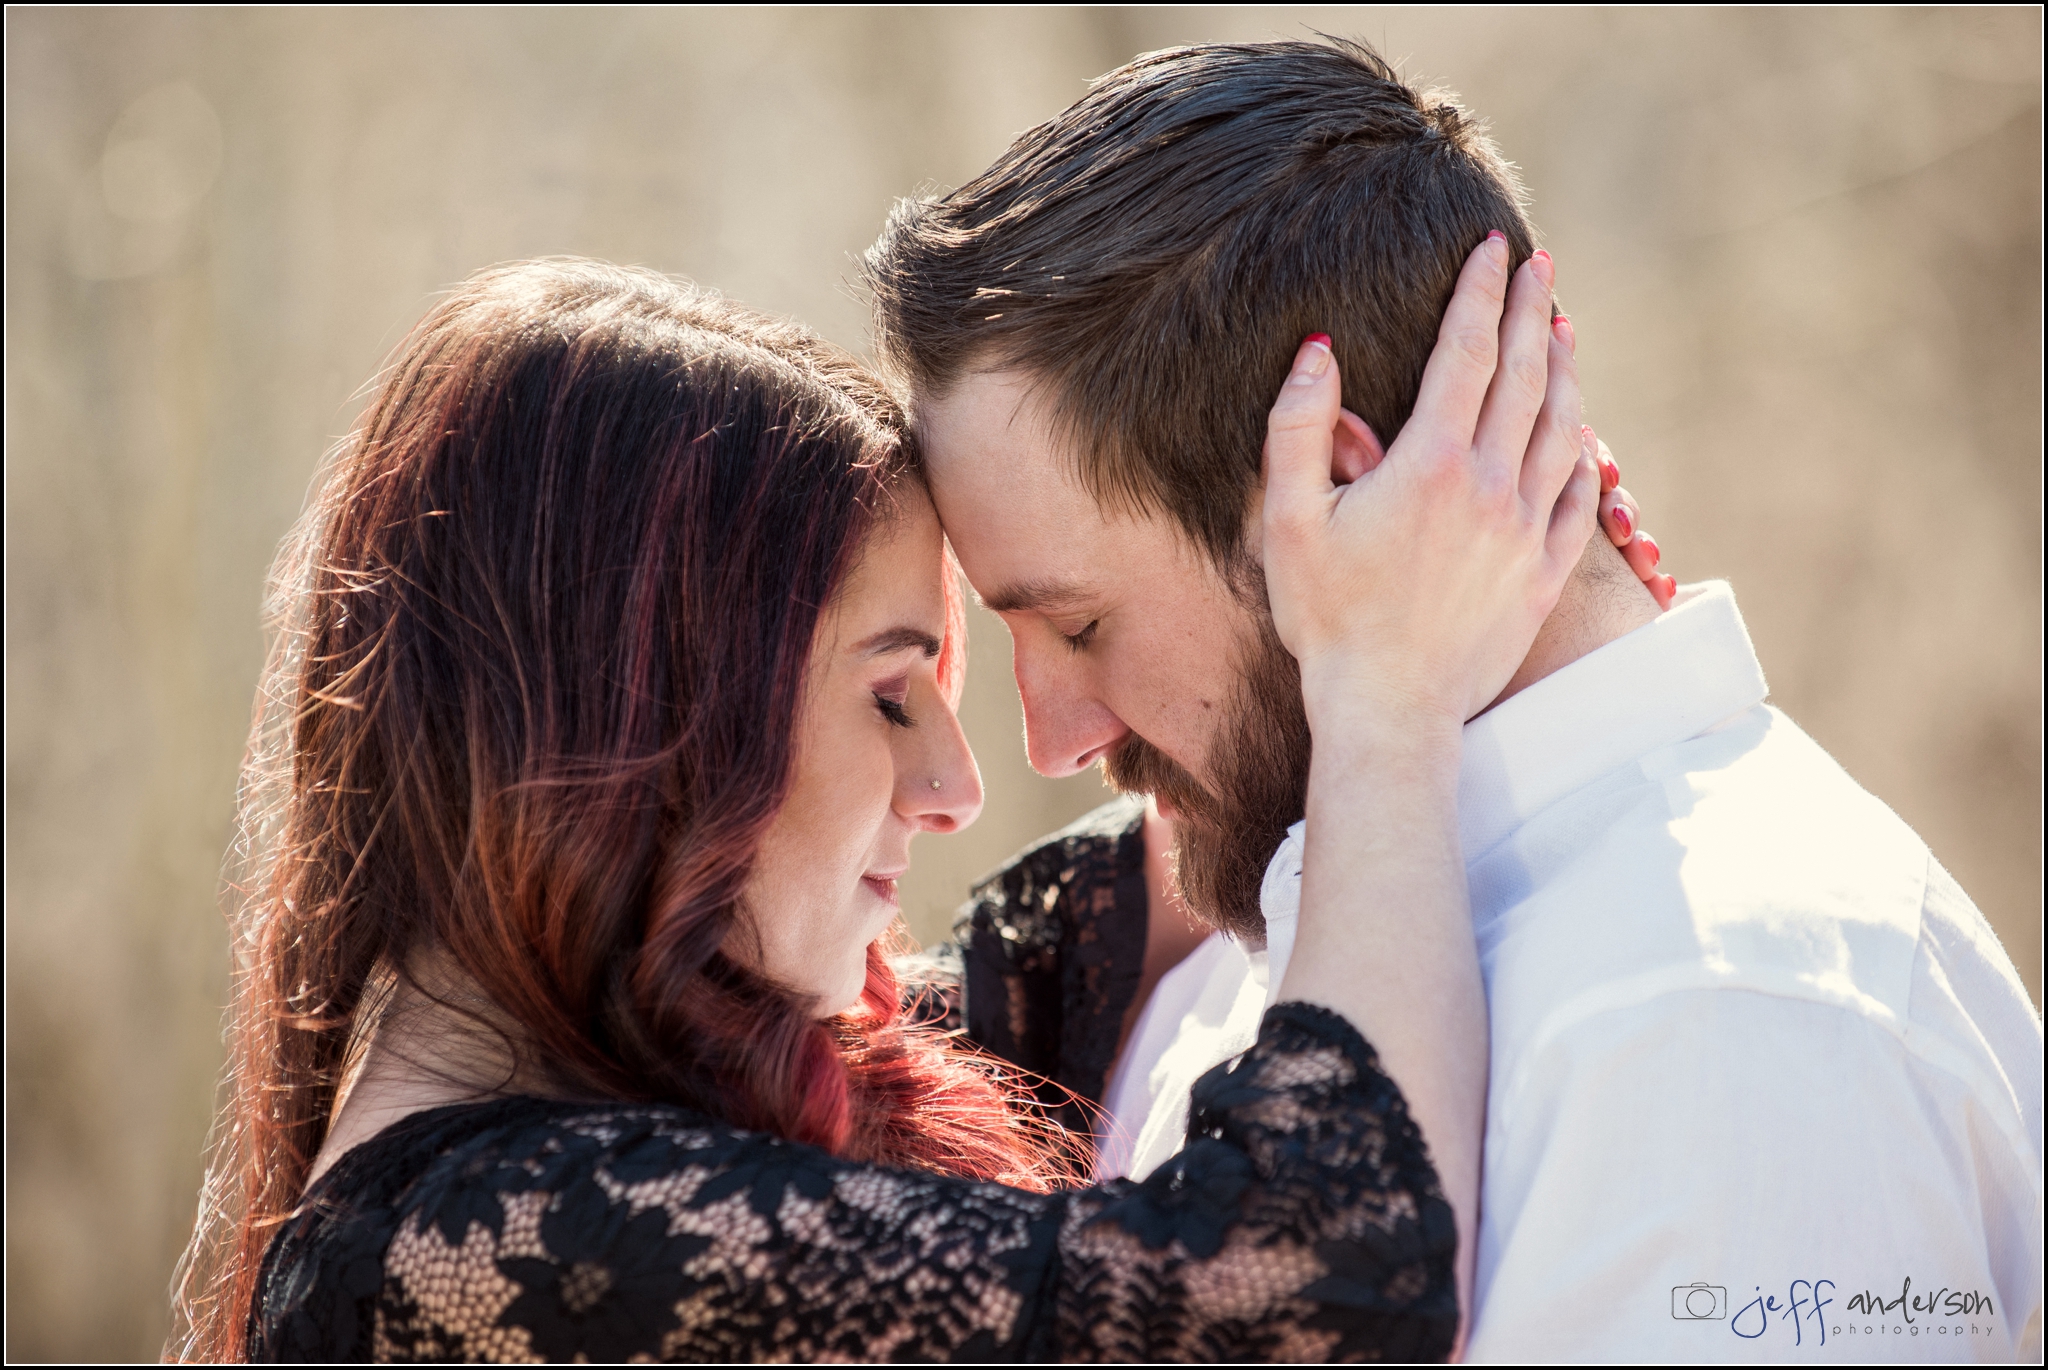 Media PA photographer,delaware county photographer,engagement session,jeff anderson photography,macey & andrew,ridley creek state park,ridley creek state park mansion,